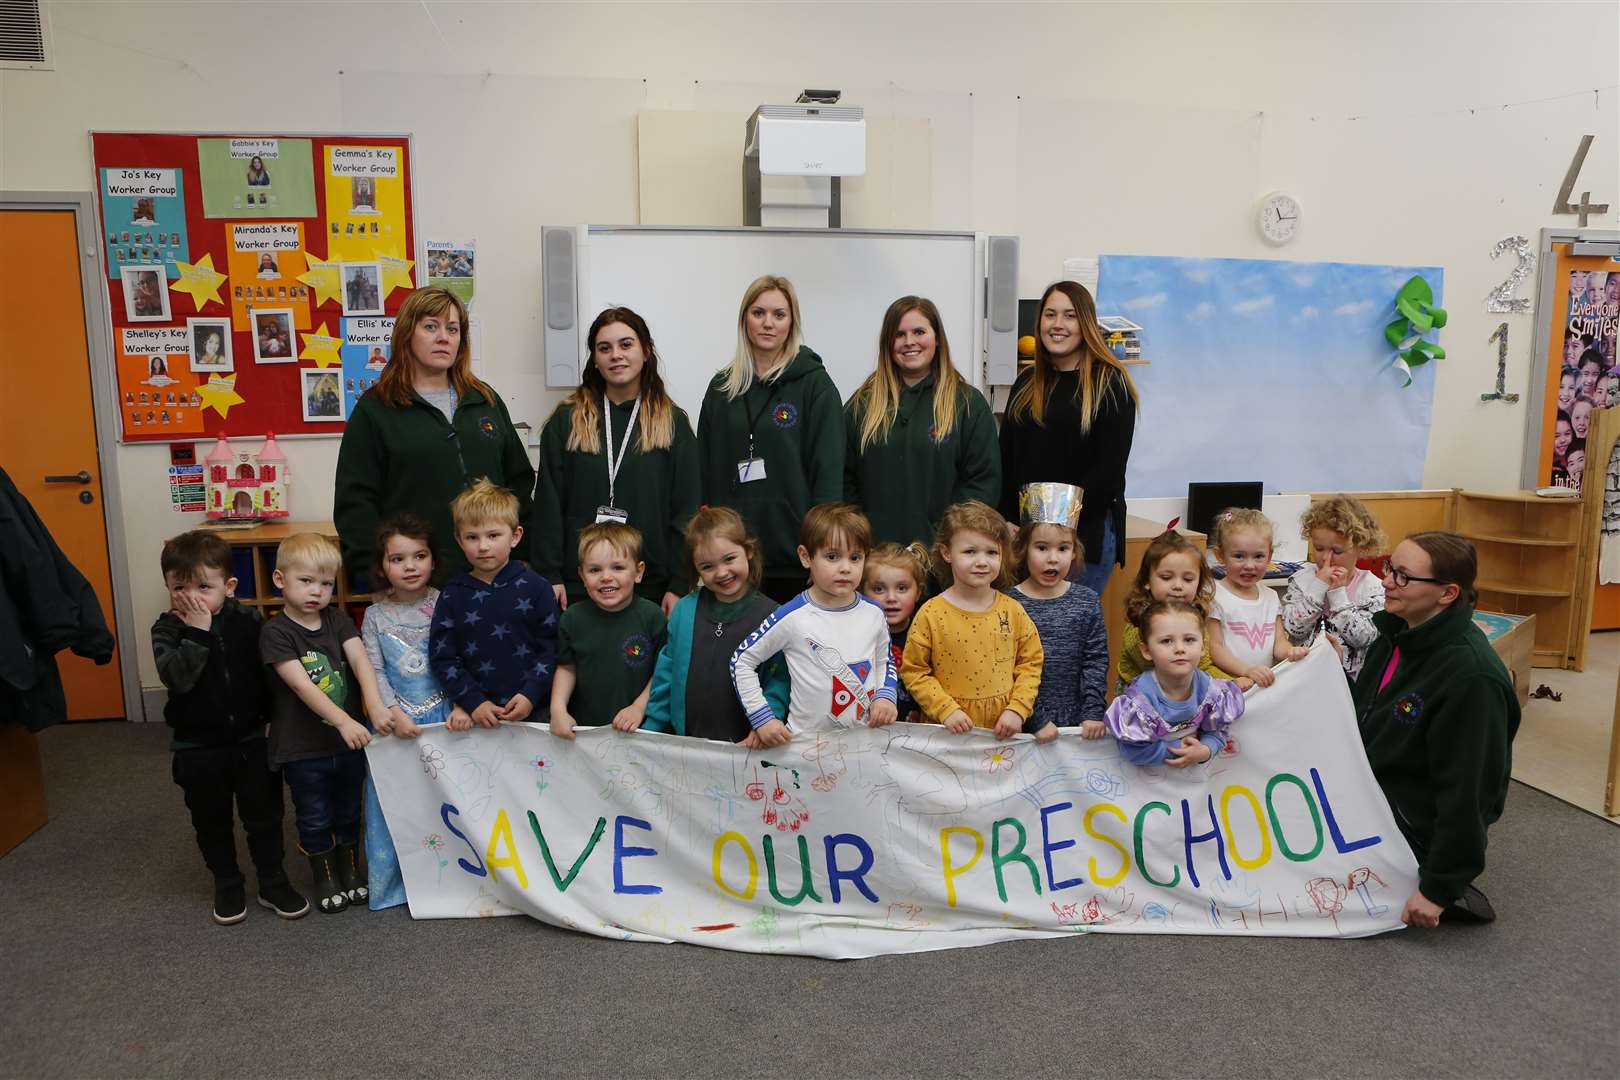 The pre school has been given just six months to find a new home